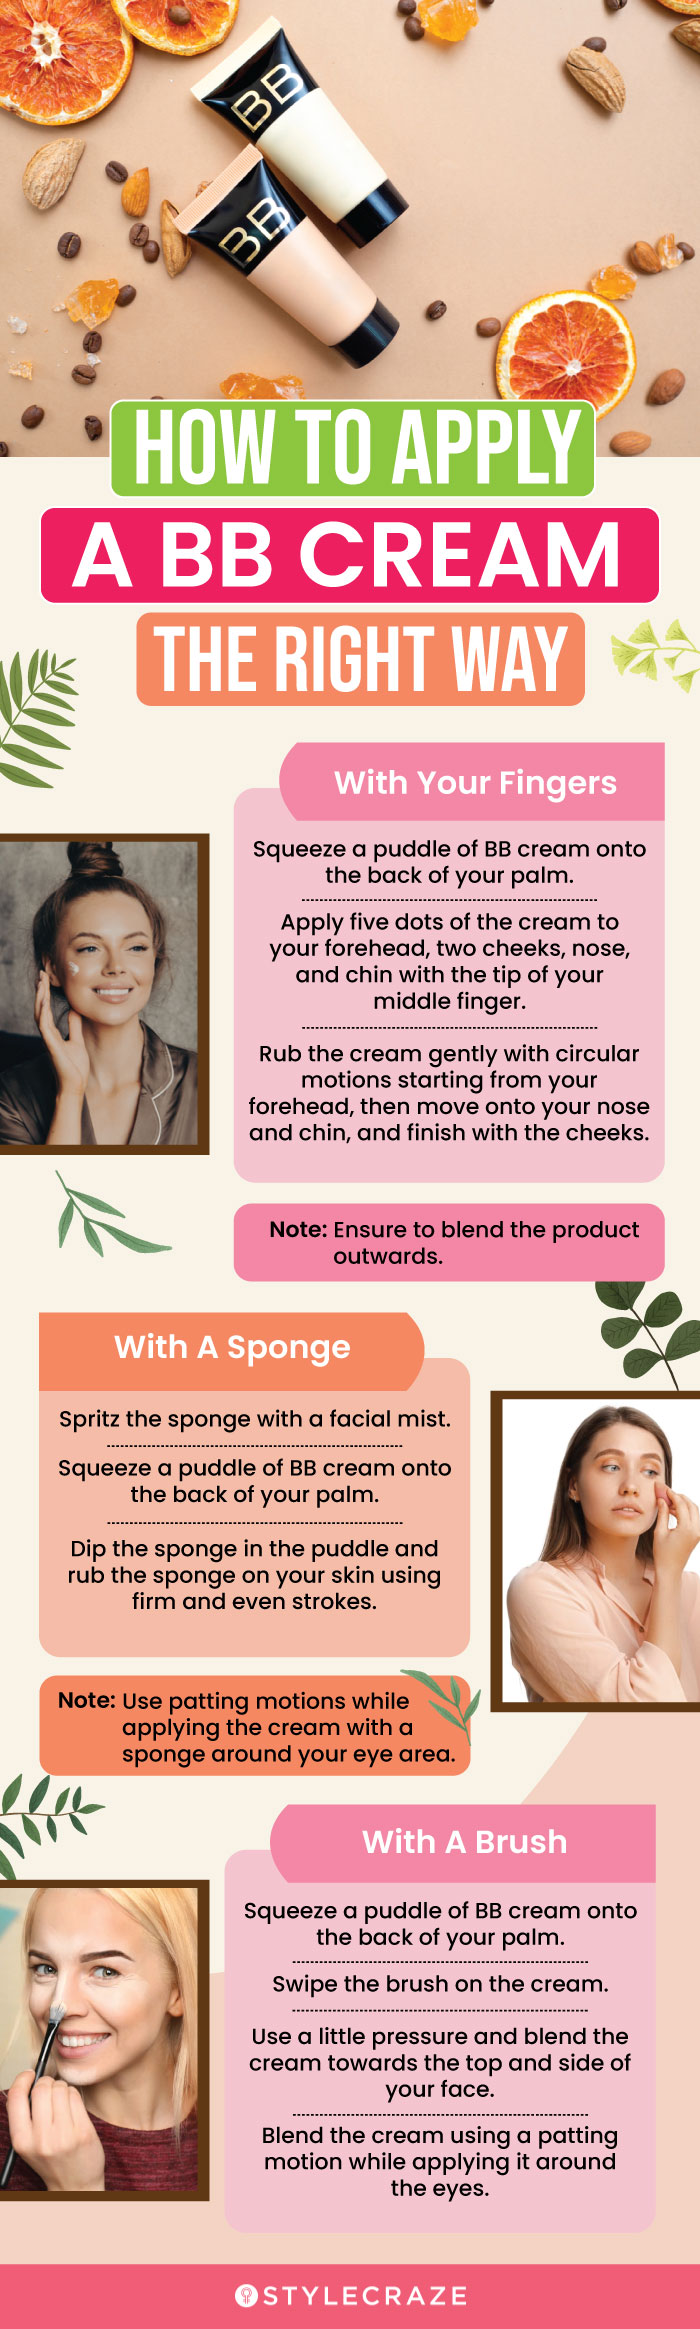 How To Apply A BB Cream The Right Way (infographic)